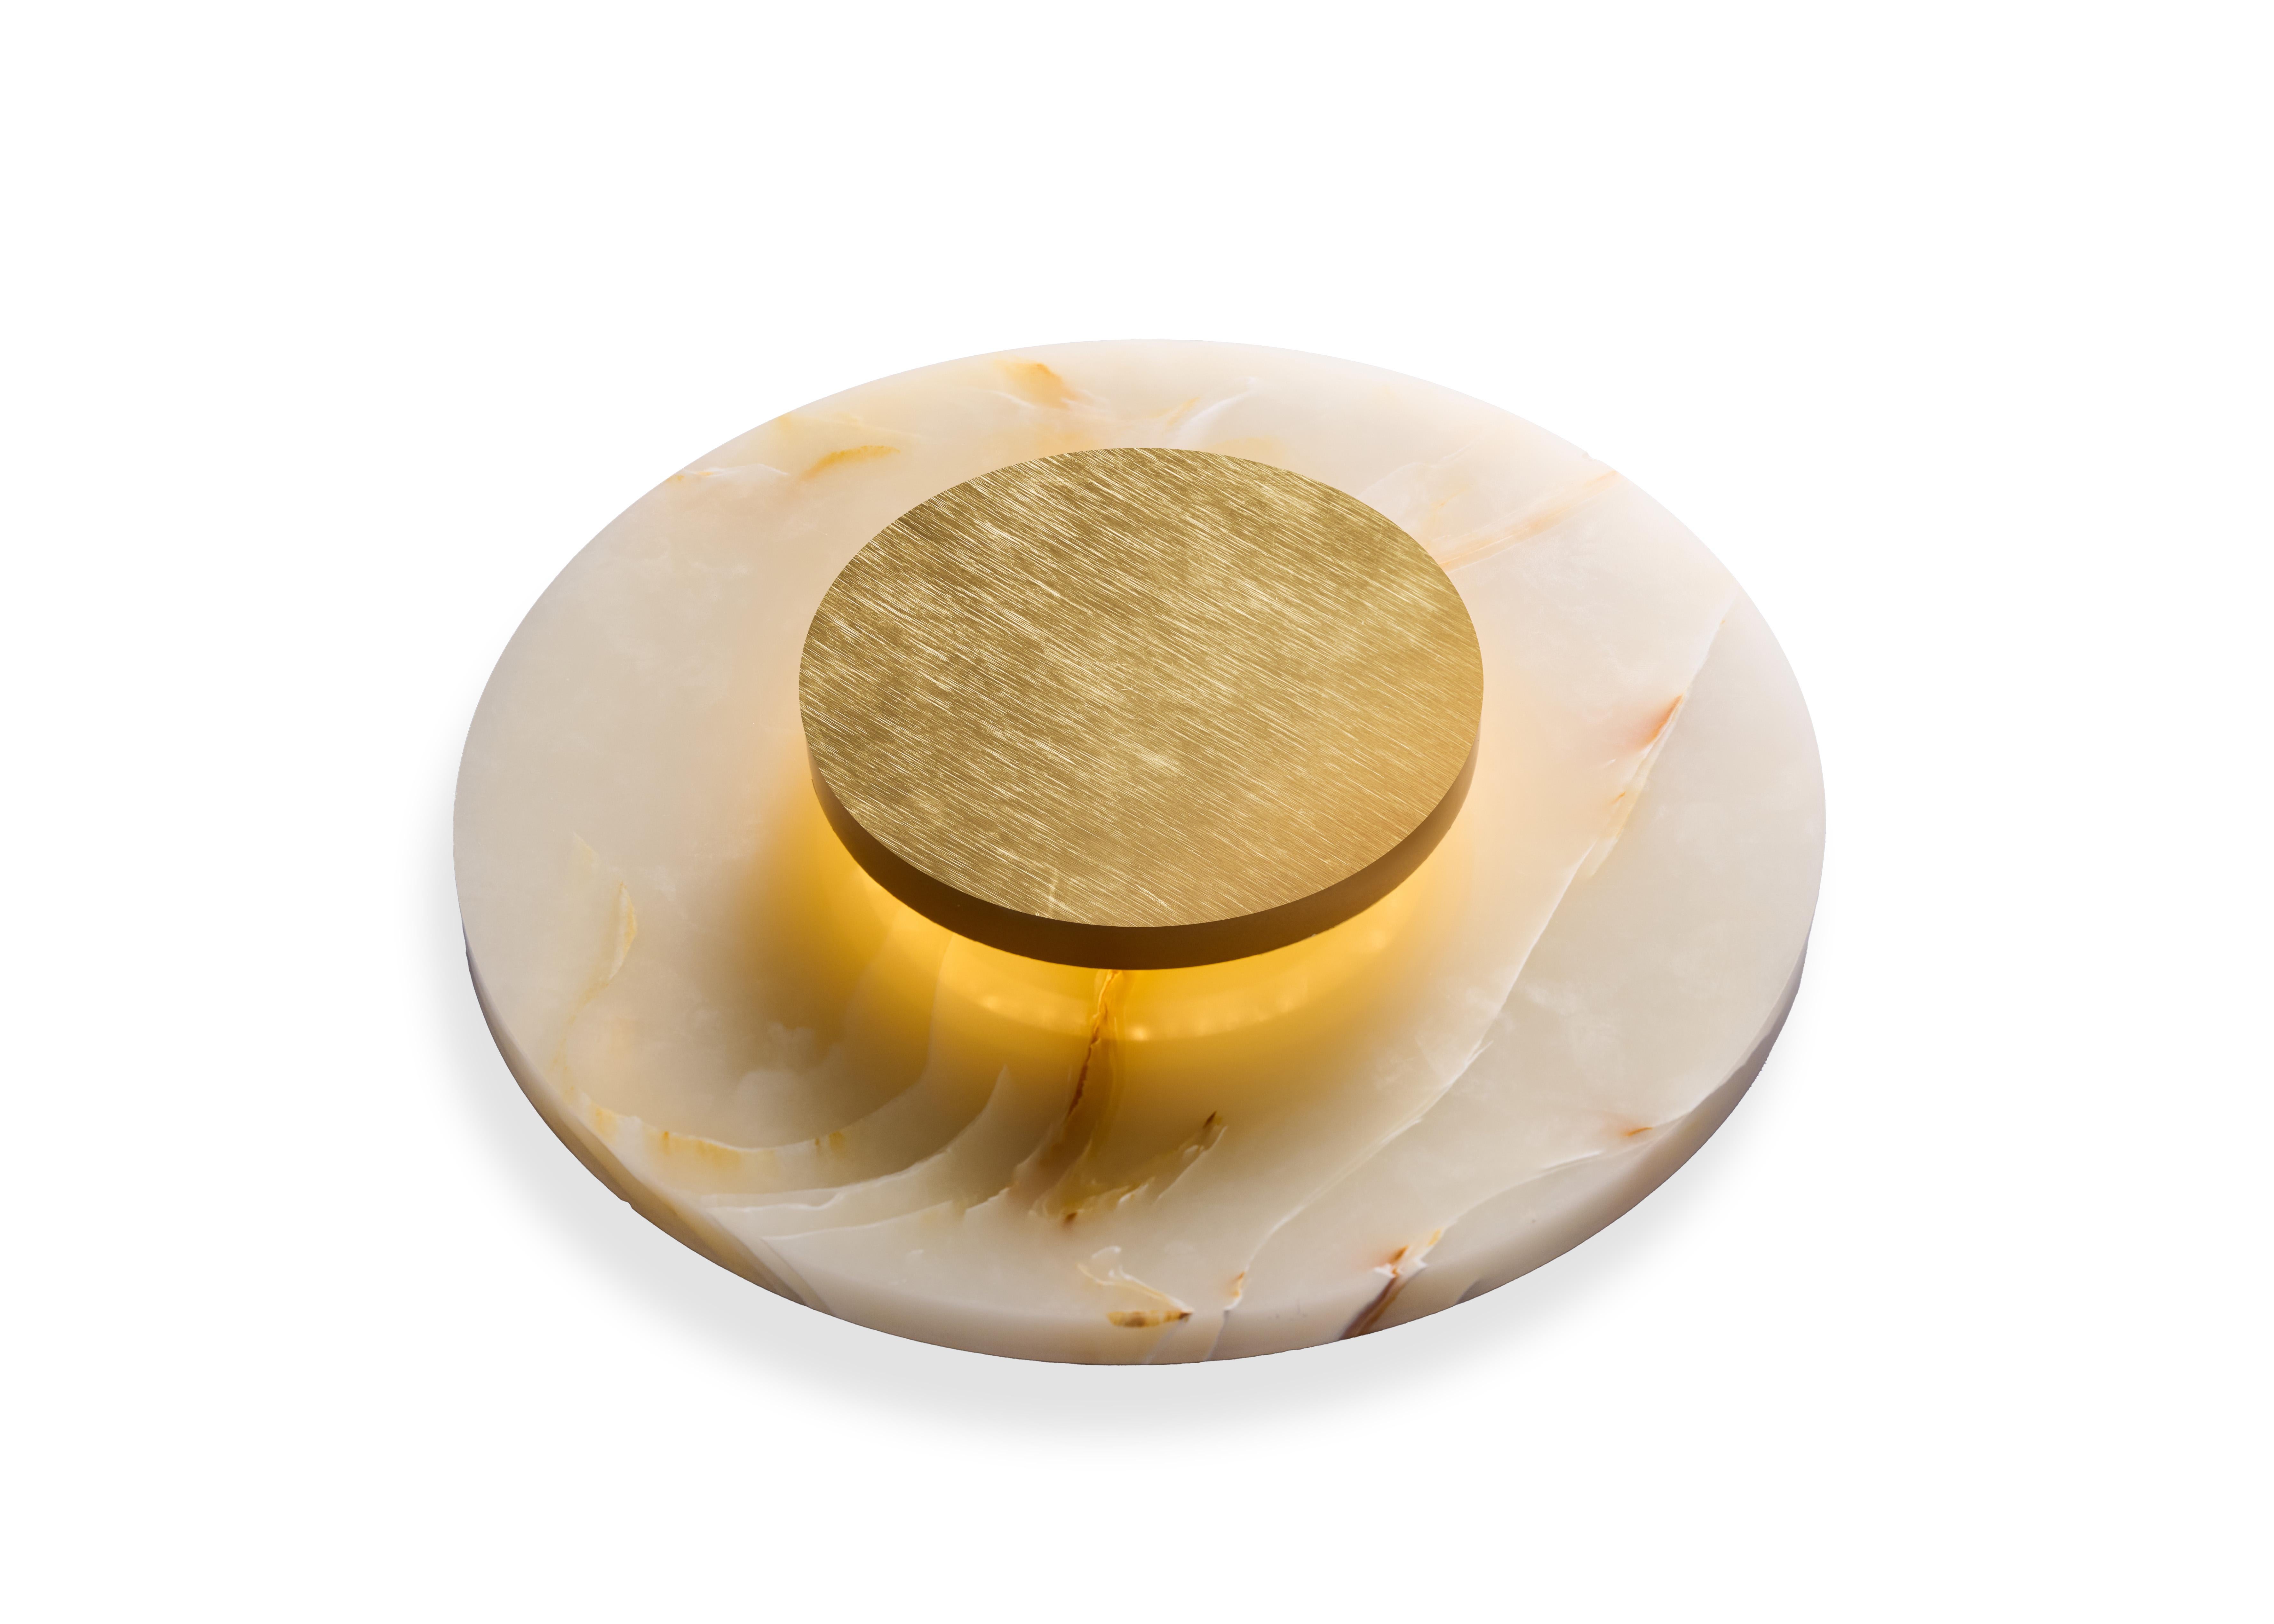 Soft hues emanate from this delicate wall sconce. A backlit brass
accent creates a unique glow against the light passing Onyx marble
and highlights its natural variations. A solid but refined piece with
a simple silhouette, this is mood lighting